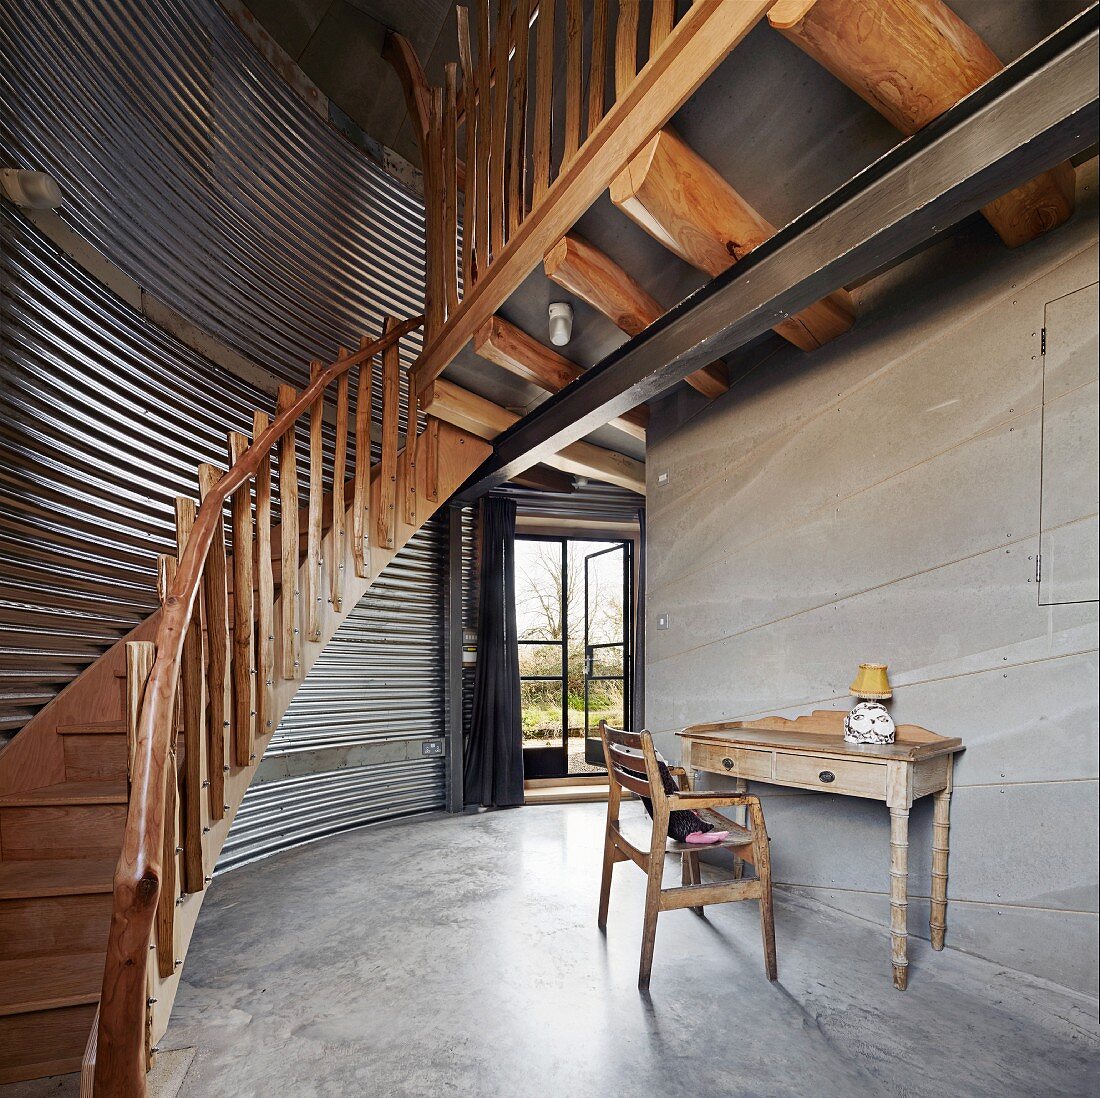 Wooden staircase in converted silo